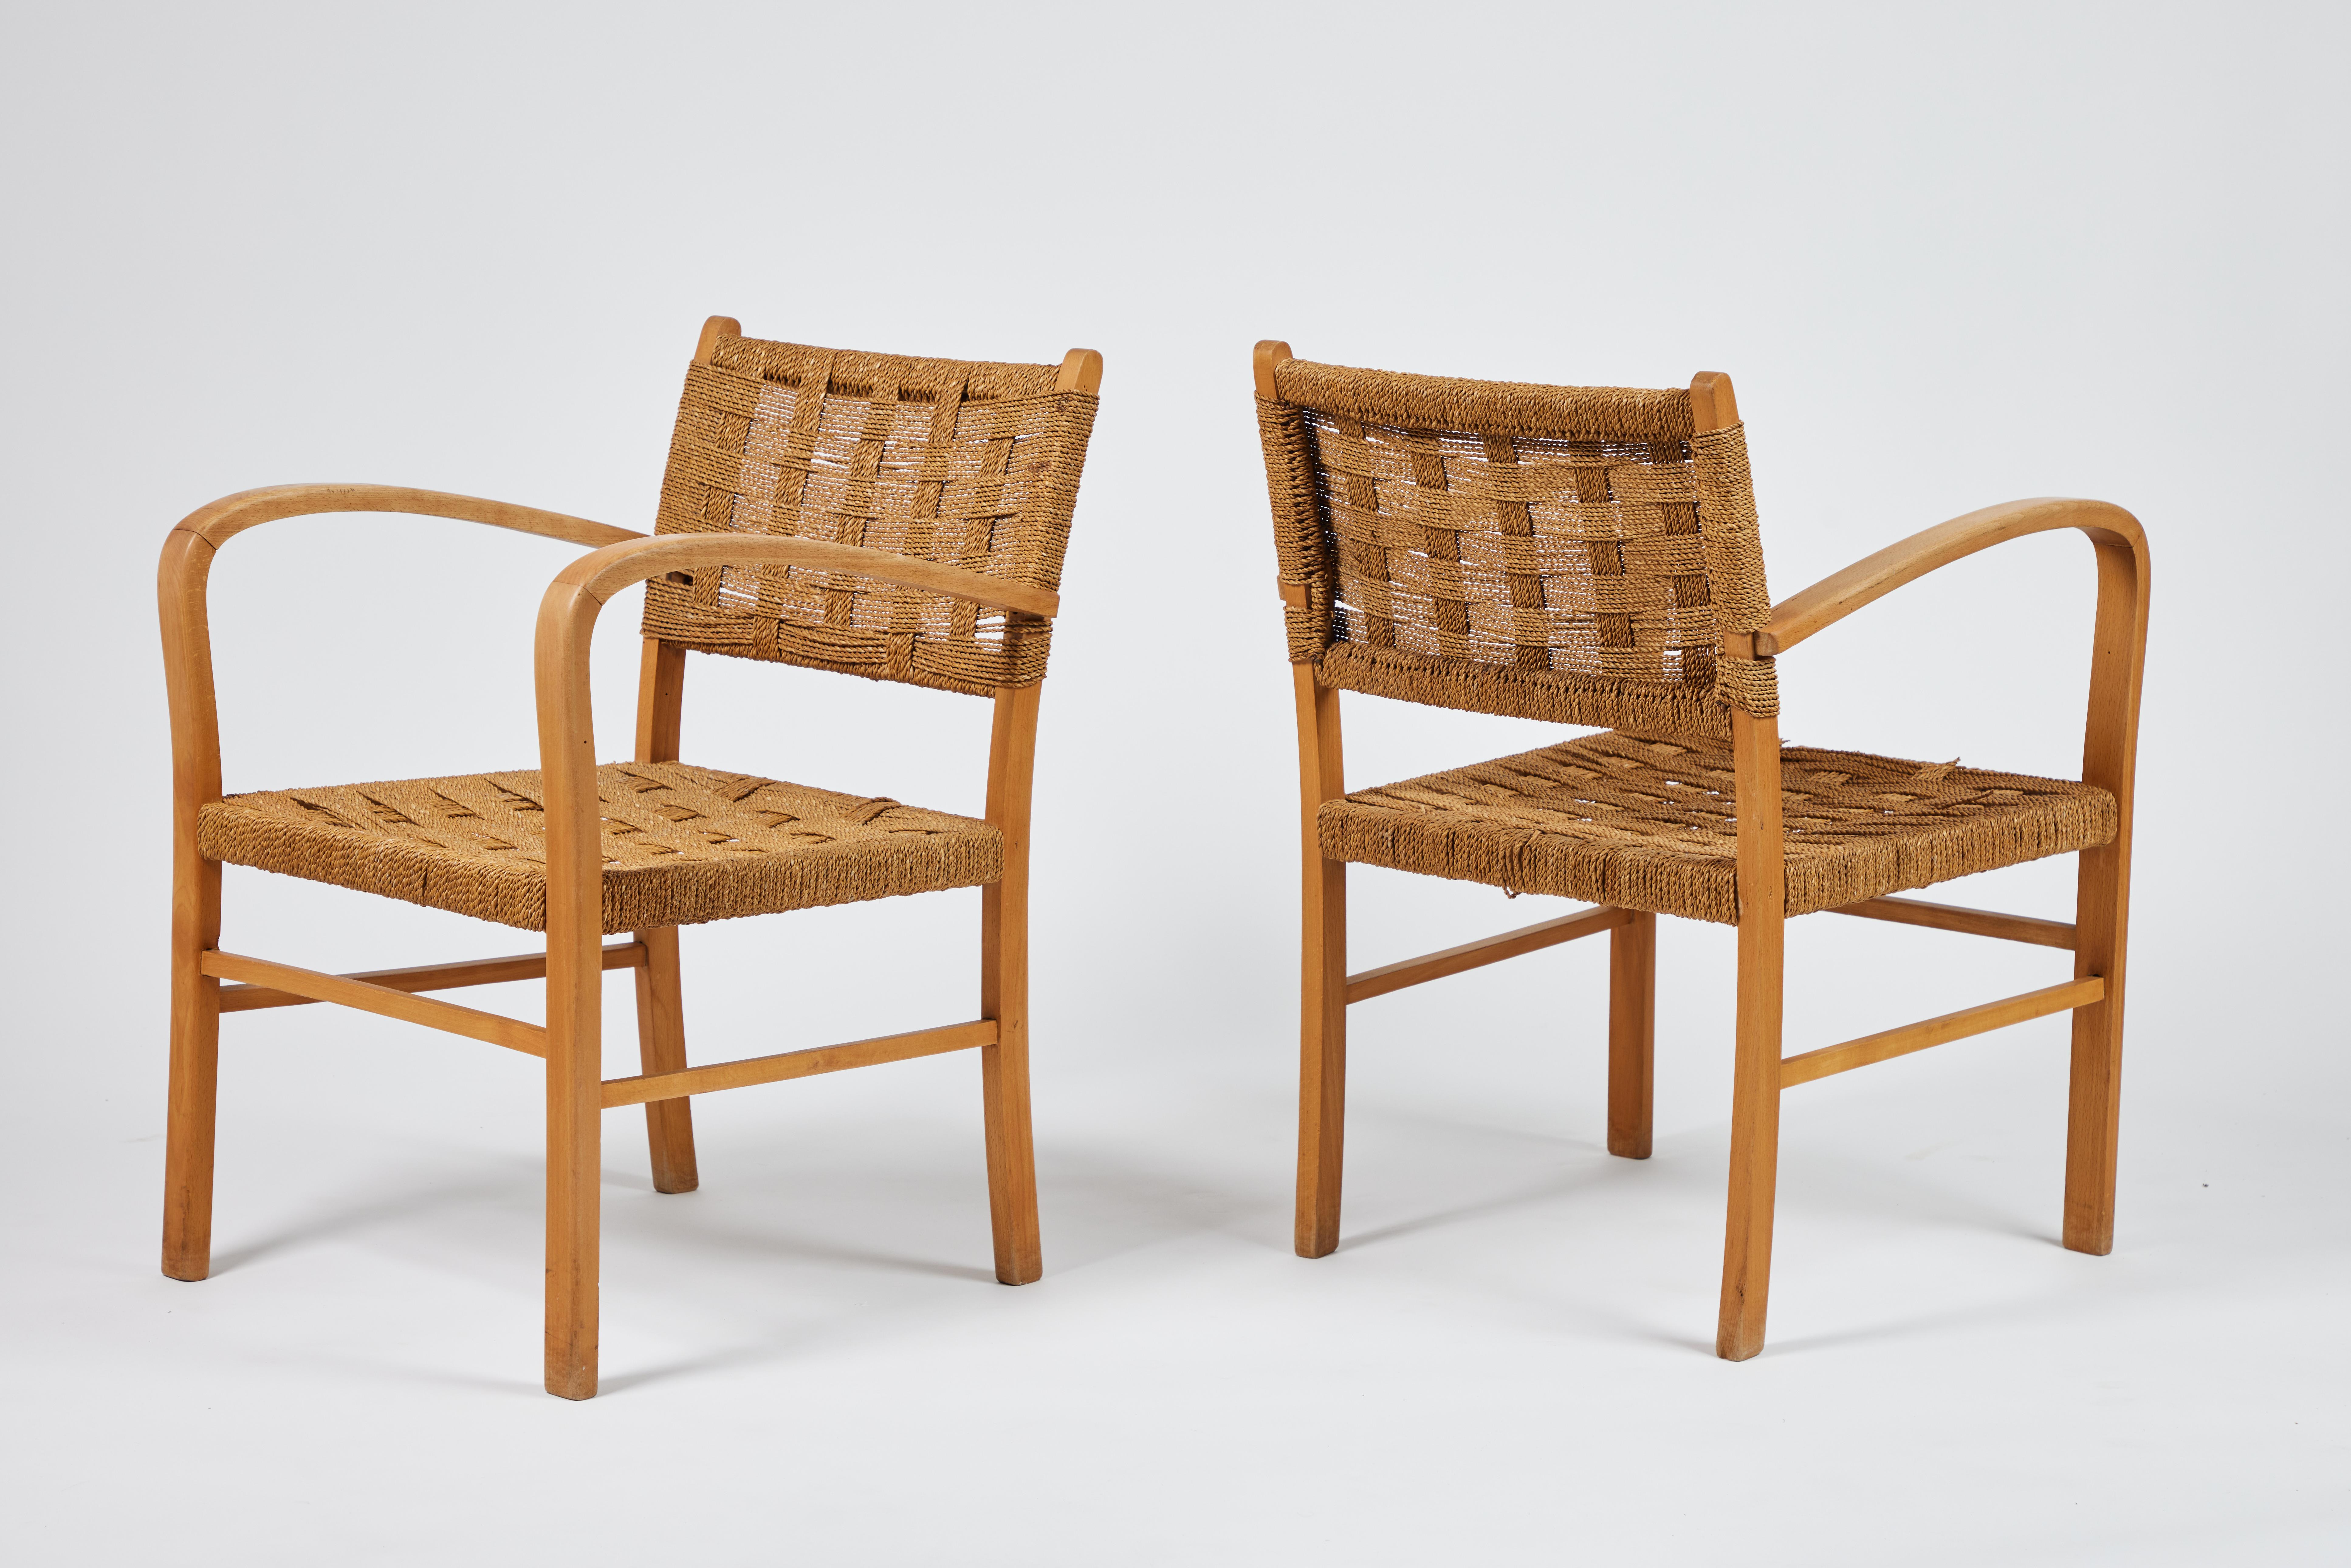 Pair of mid-century French oak arm chairs with curved, sculptural arms. Woven seat and back supports are comprised of groups of 8 thin ropes form each 